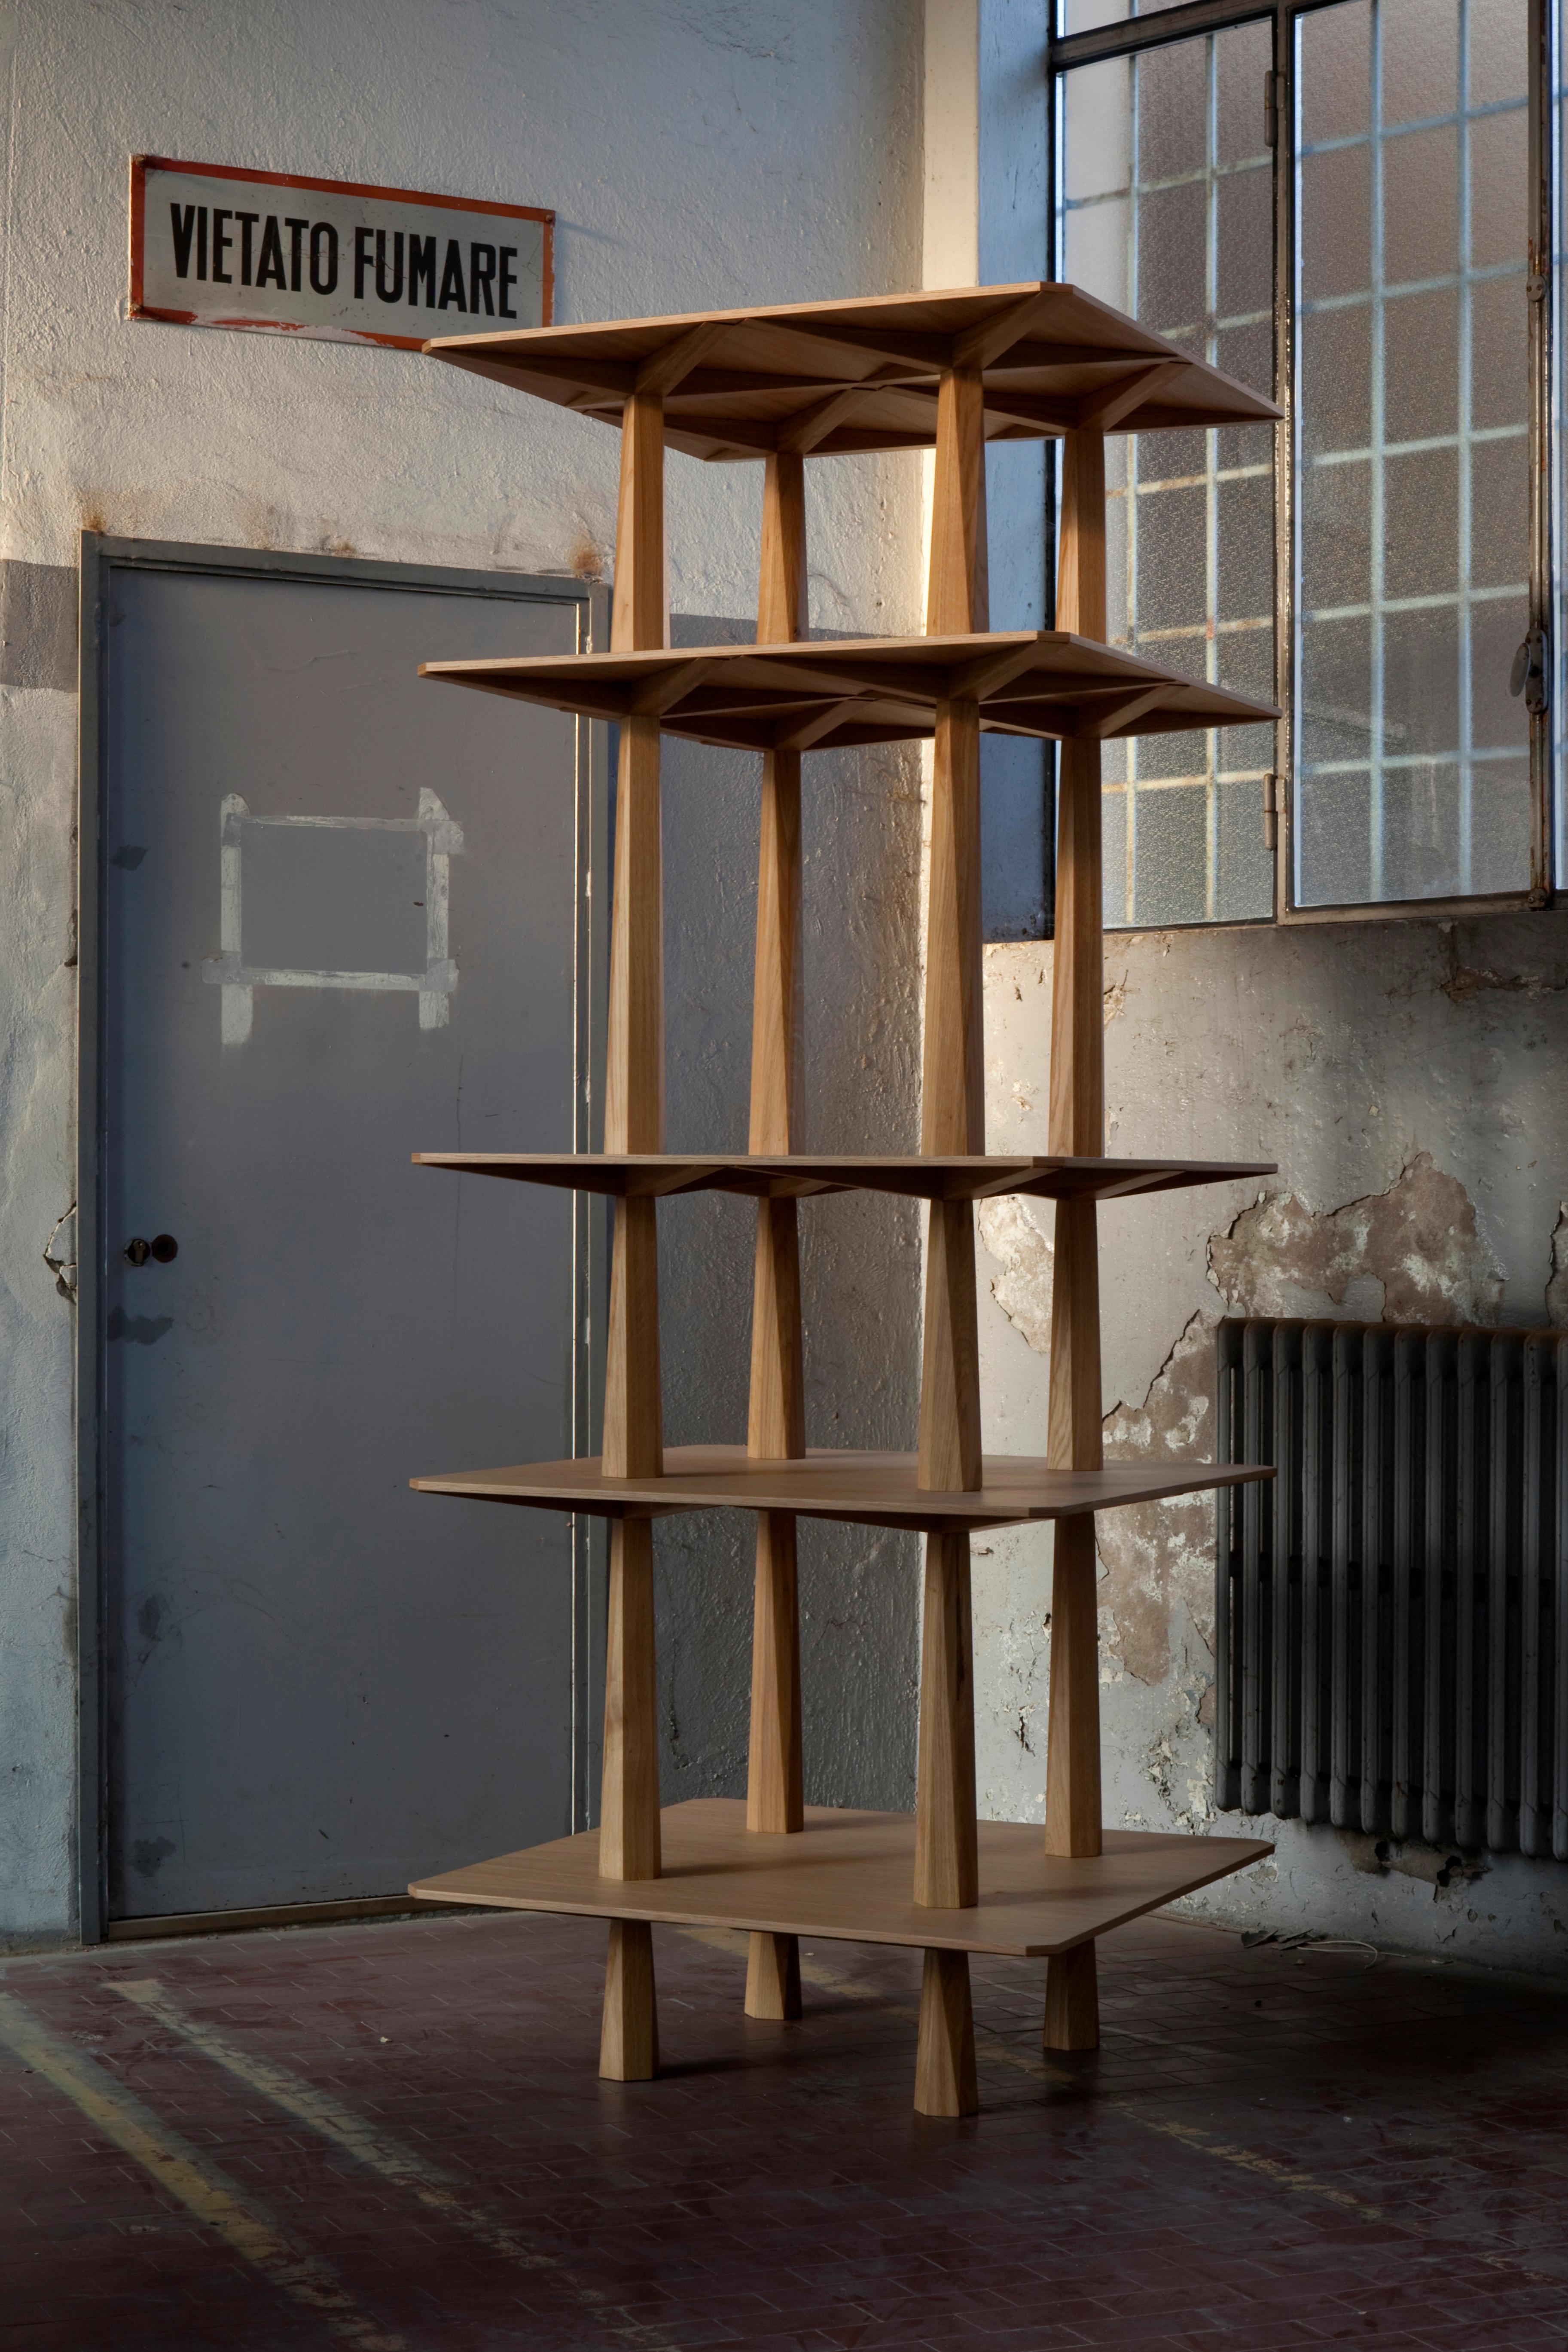 Centina TOTEM shelves by Oeuffice
Edition: 8 + 2AP
2011
Dimensions: 86 x 86 x 205 cm
Materials: Solid handcrafted stained oak

The Centina TOTEM reveals in a smaller scale the aesthetic fascination
of concrete bearing structures in